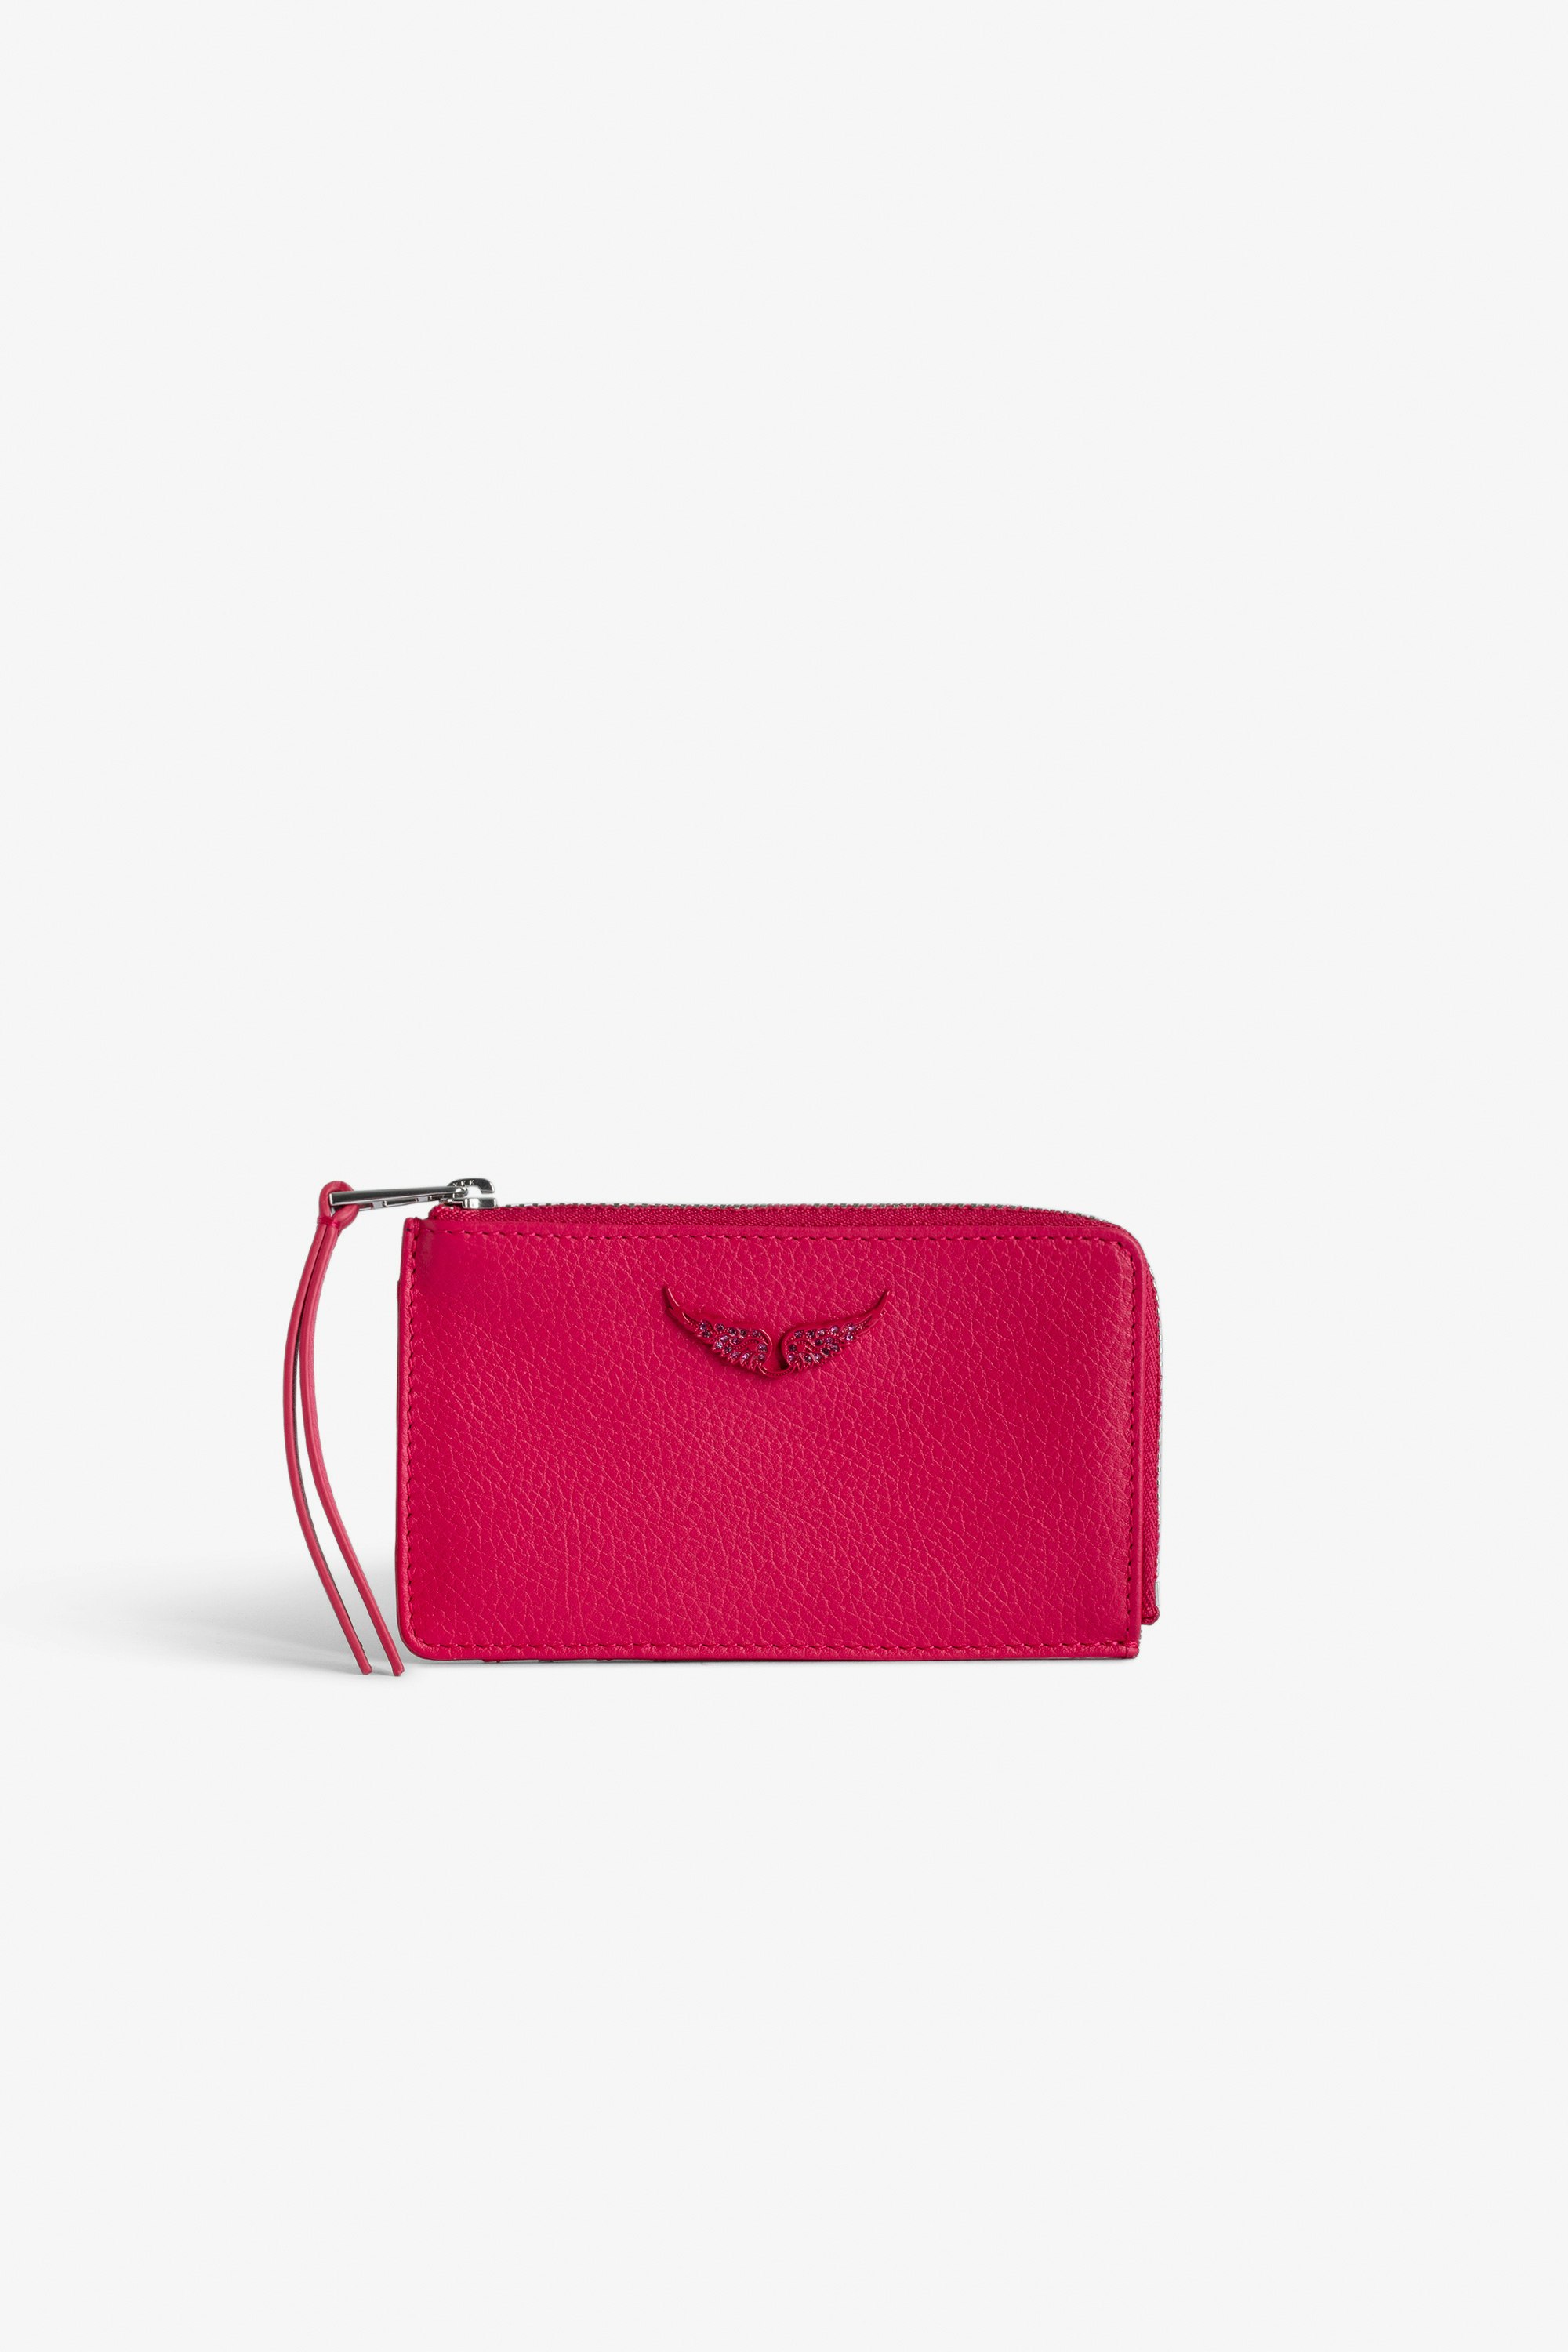 ZV Card 財布 Women’s pink grained leather card holder with wings charm.